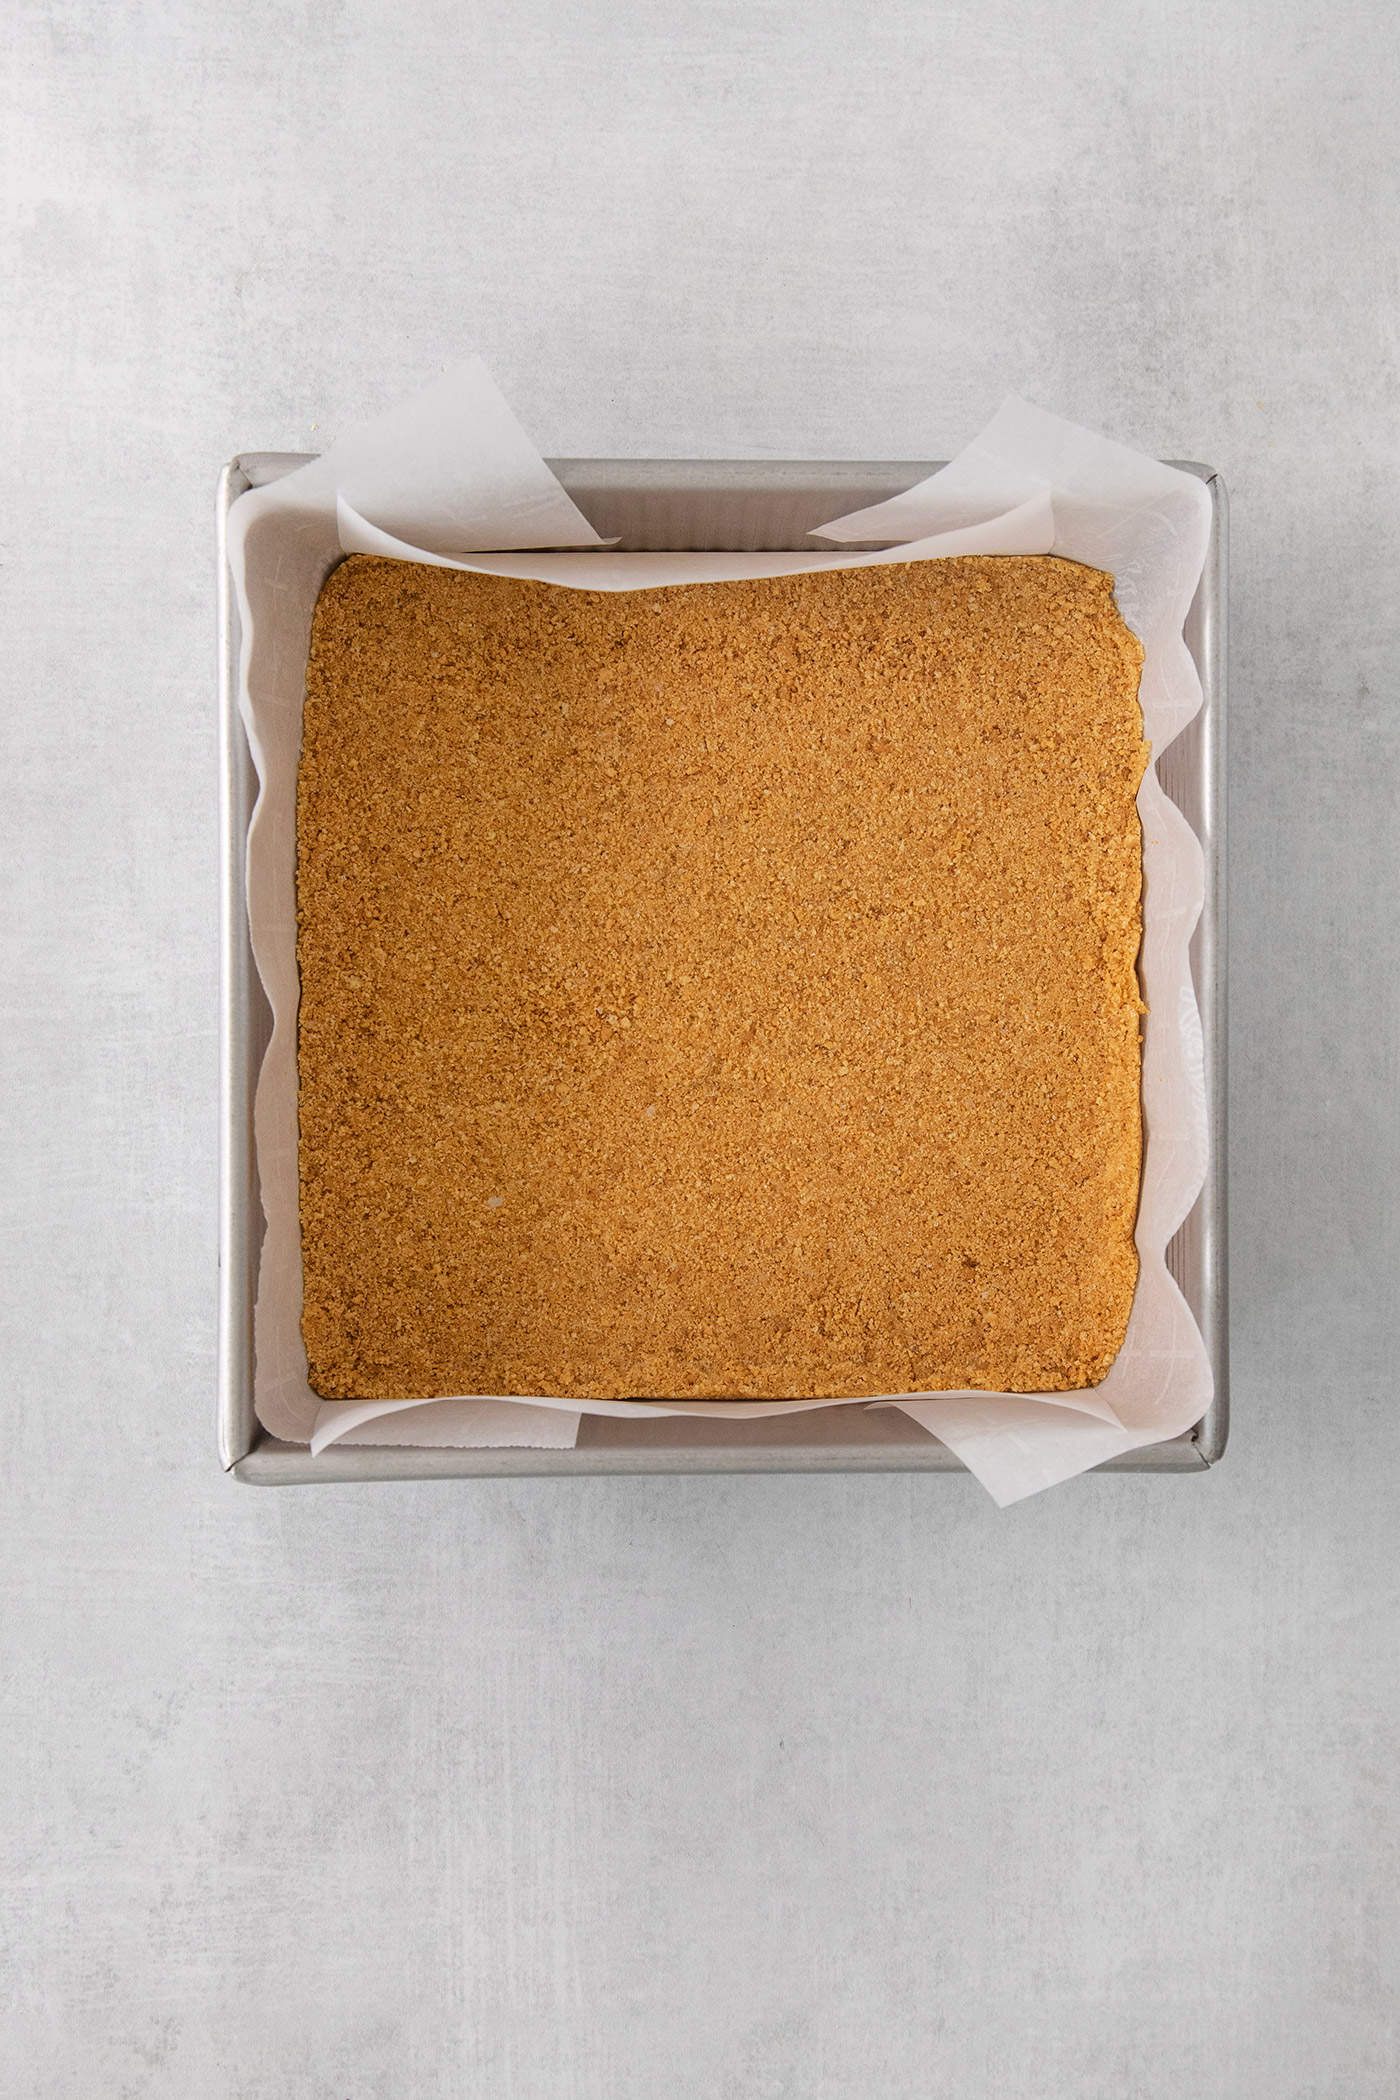 A crust is shown in a square baking pan.